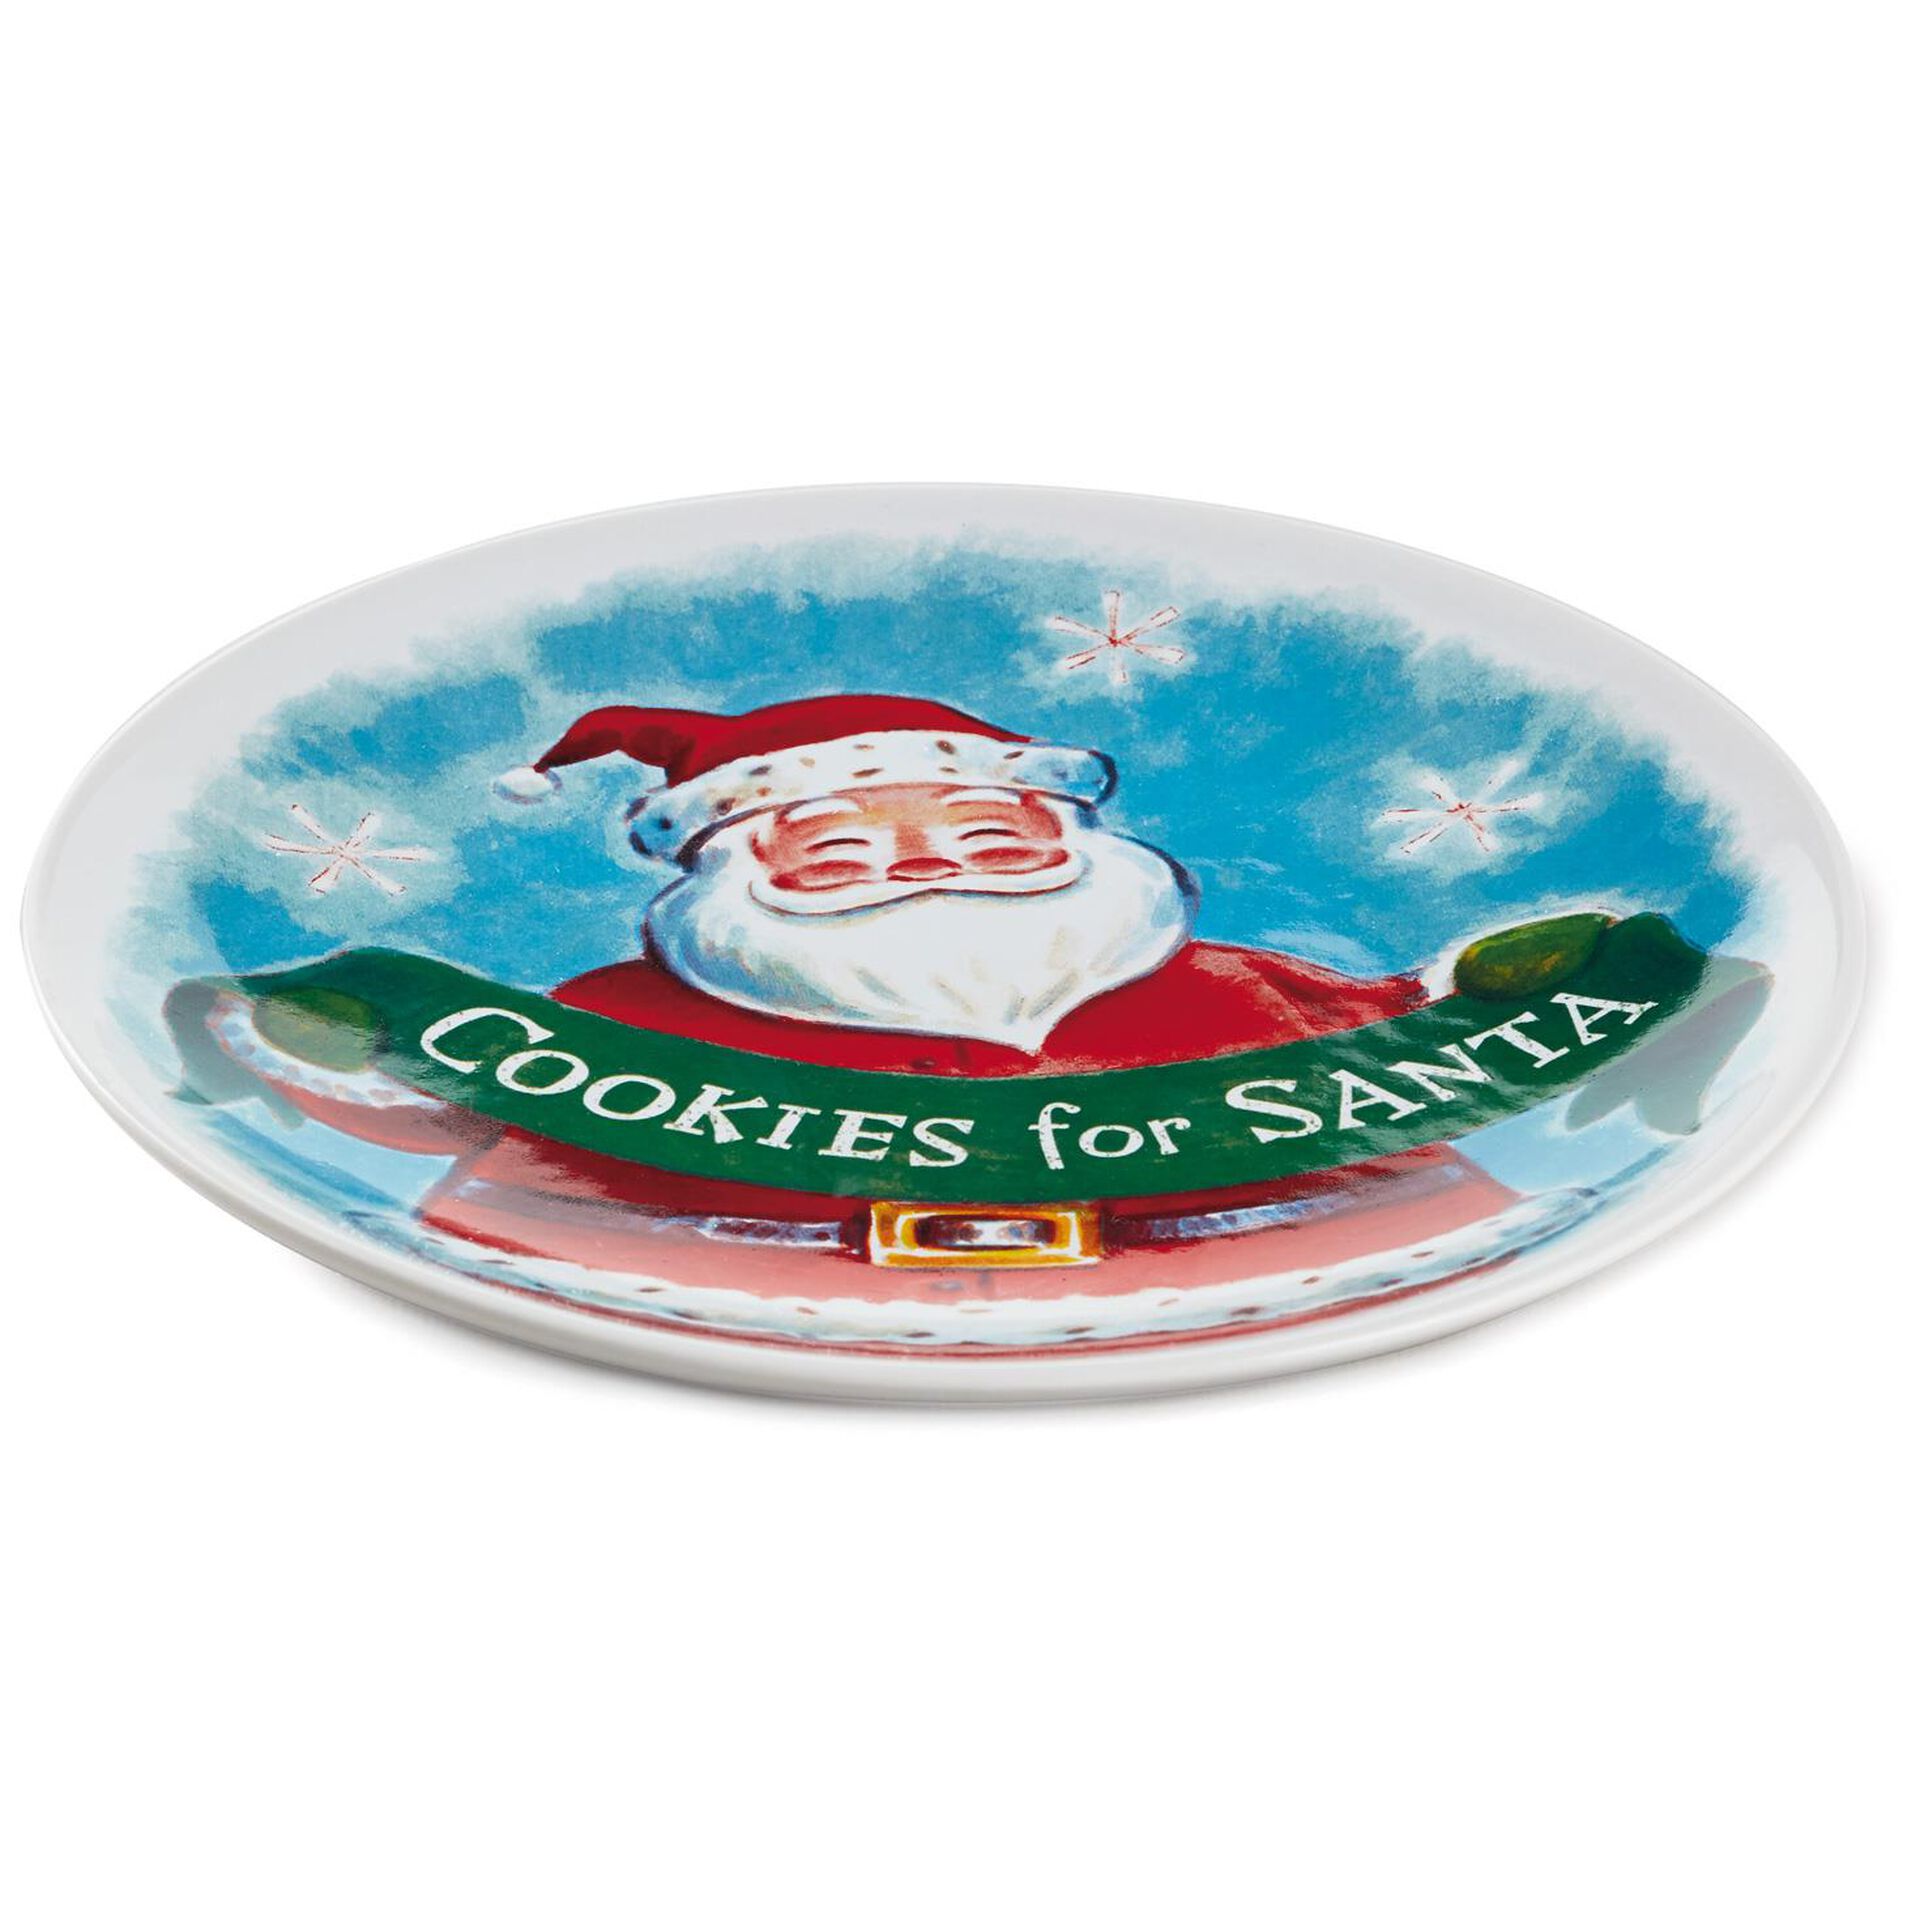 Vintage Cookies for Santa Plate Made for Fortunoff